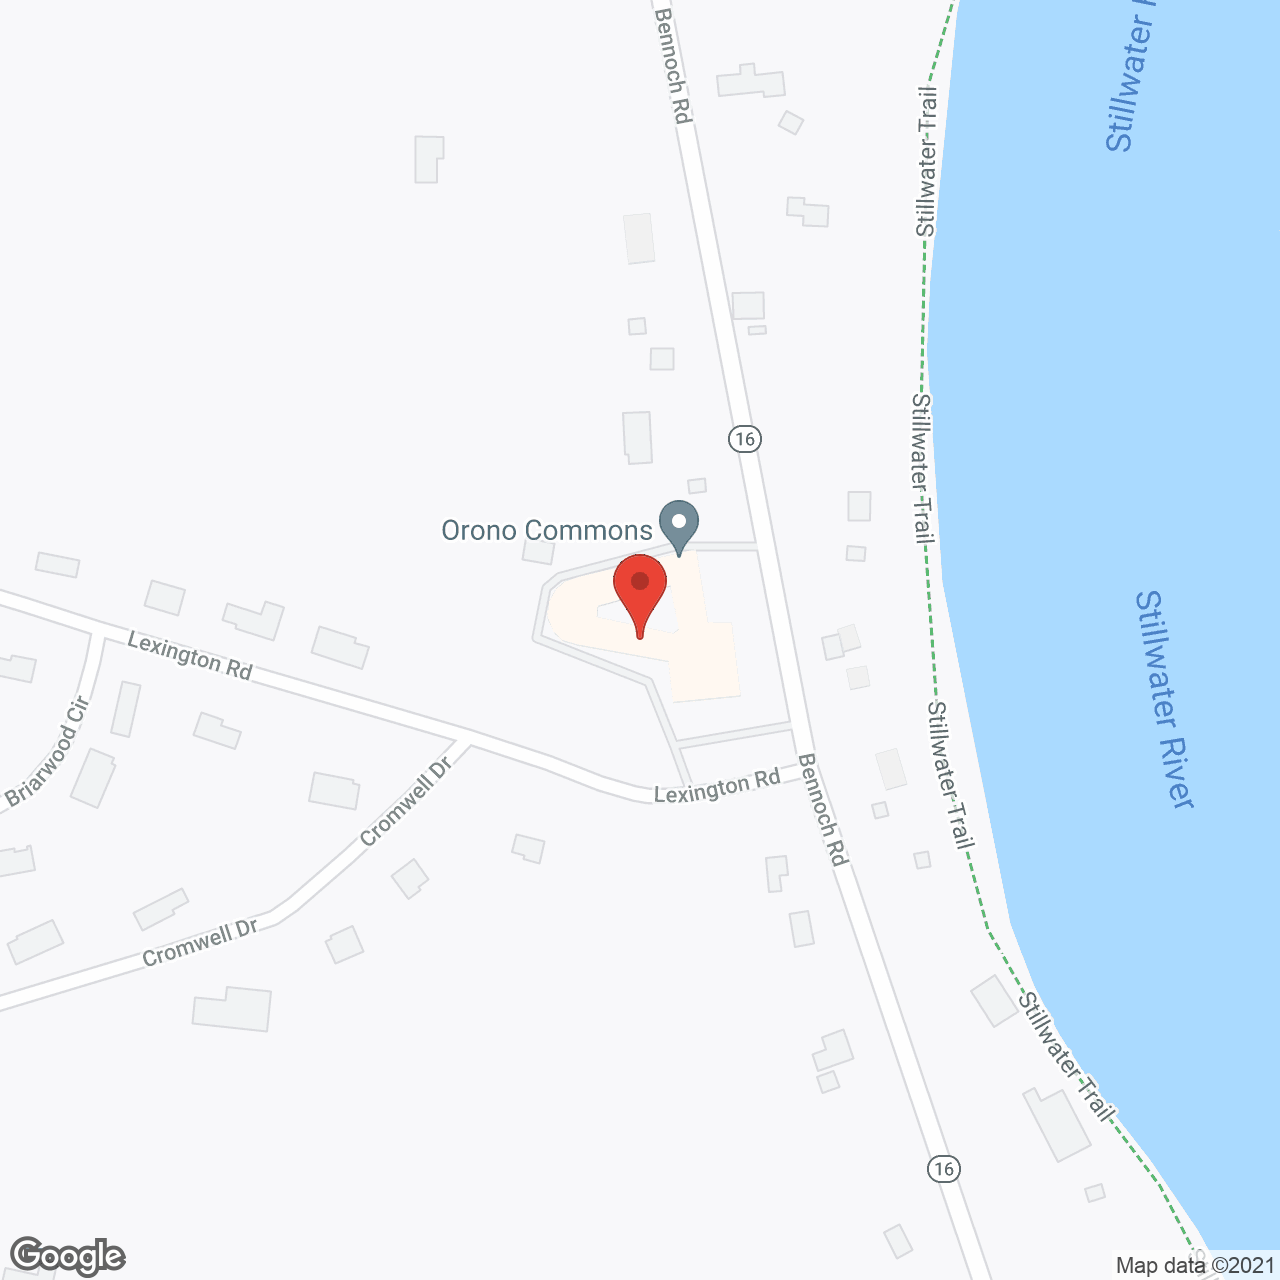 Orono Commons in google map